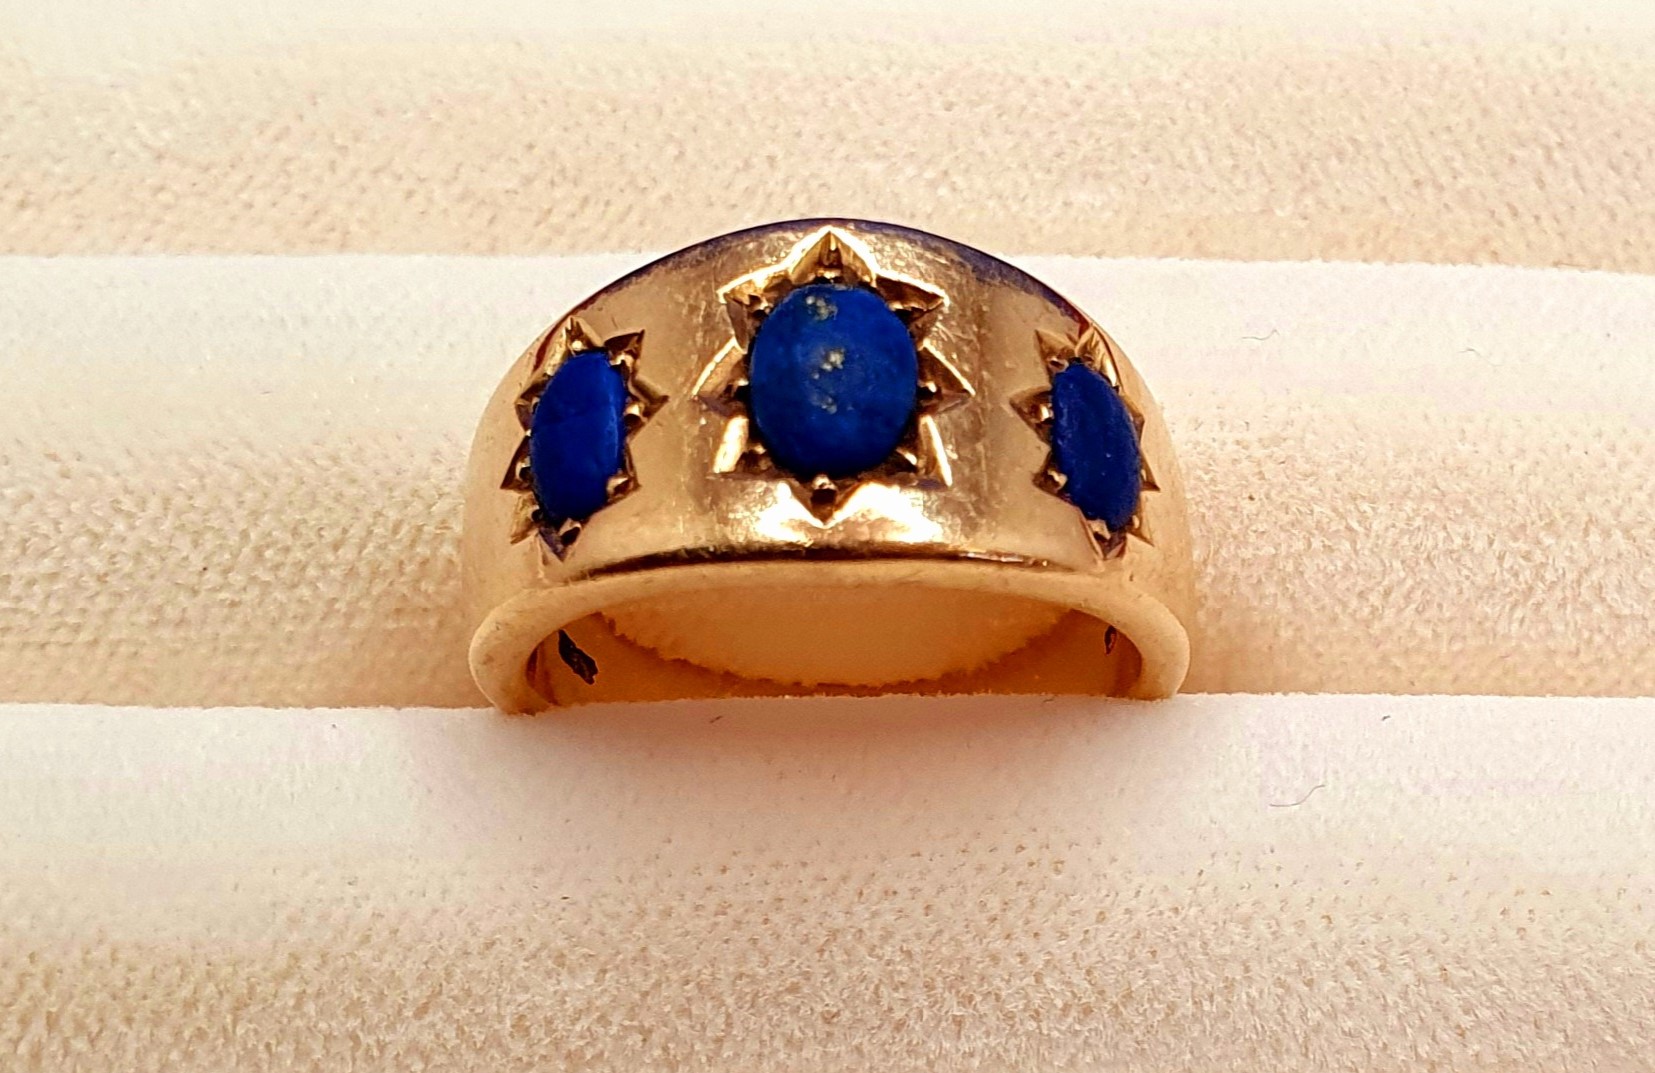 9ct Thick Yellow Gold Ring set with three blue stones, weight 6.96g, size K, Hallmarked London 1976